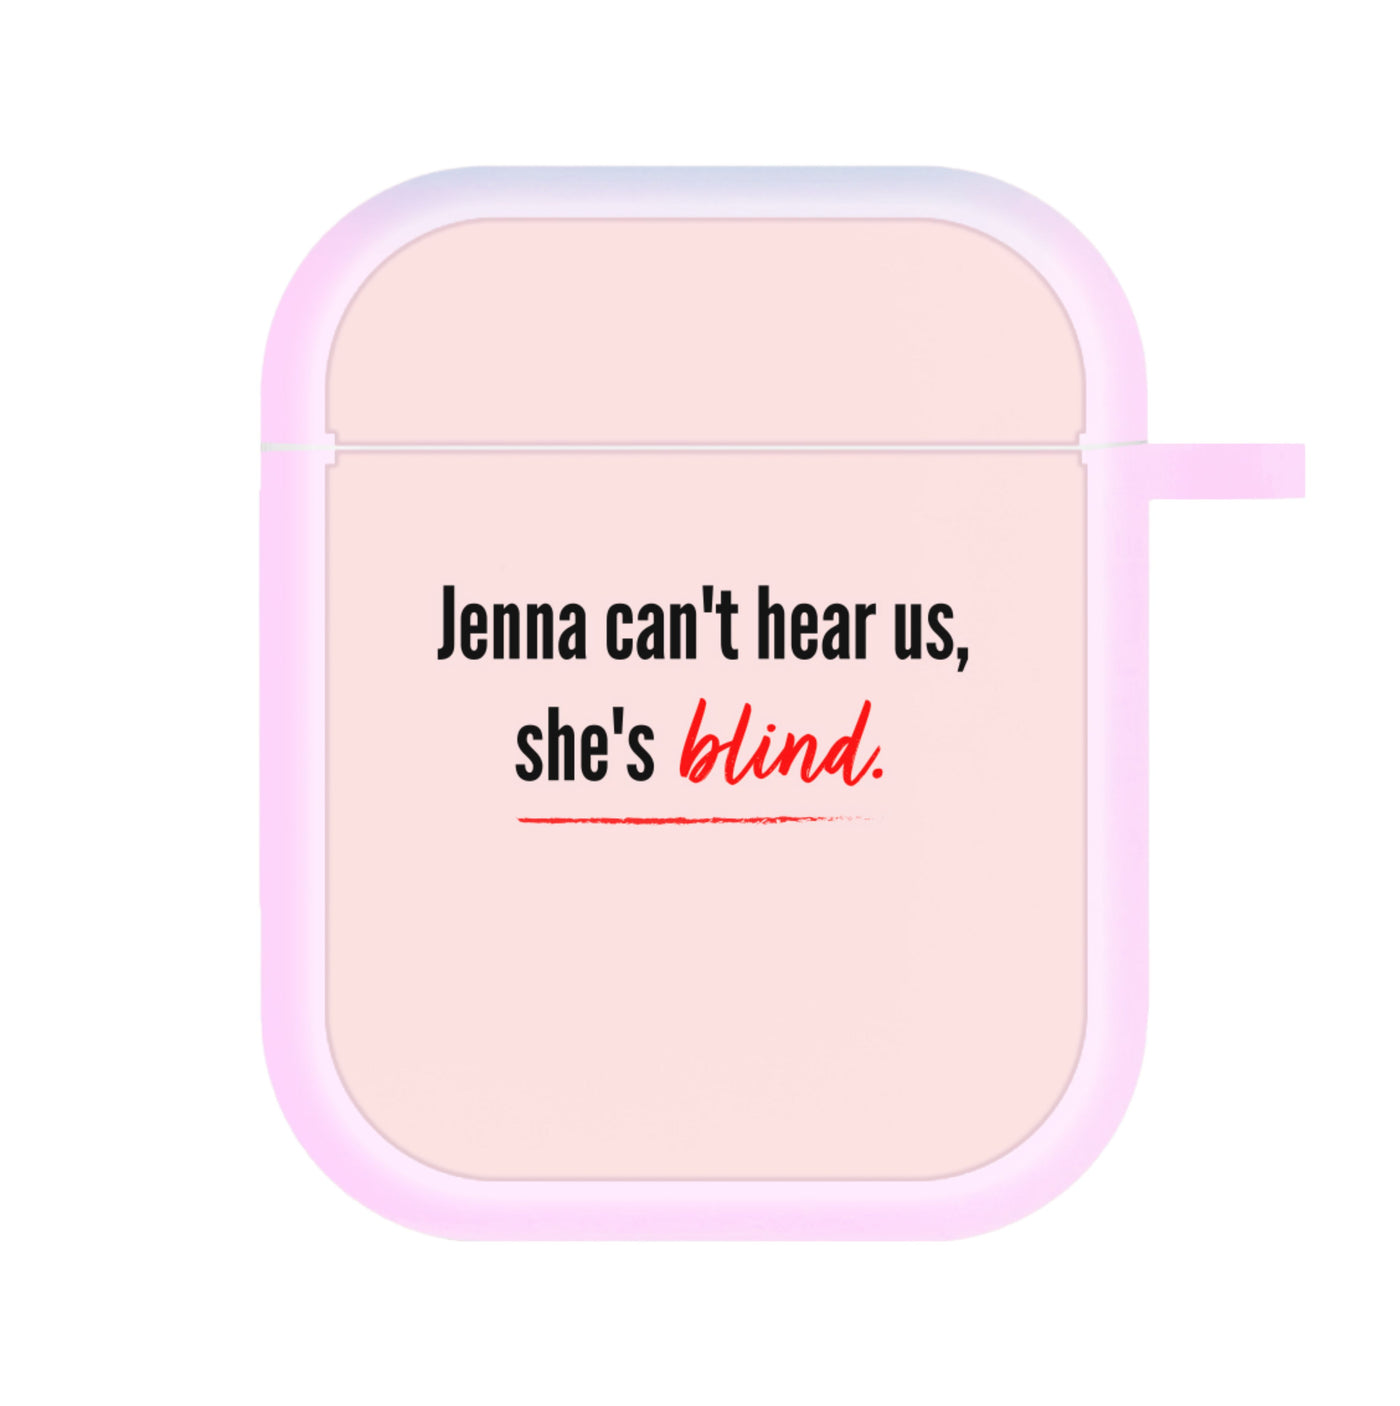 Jenna Can't Hear Us, She's Blind - Pretty Little Liars AirPods Case